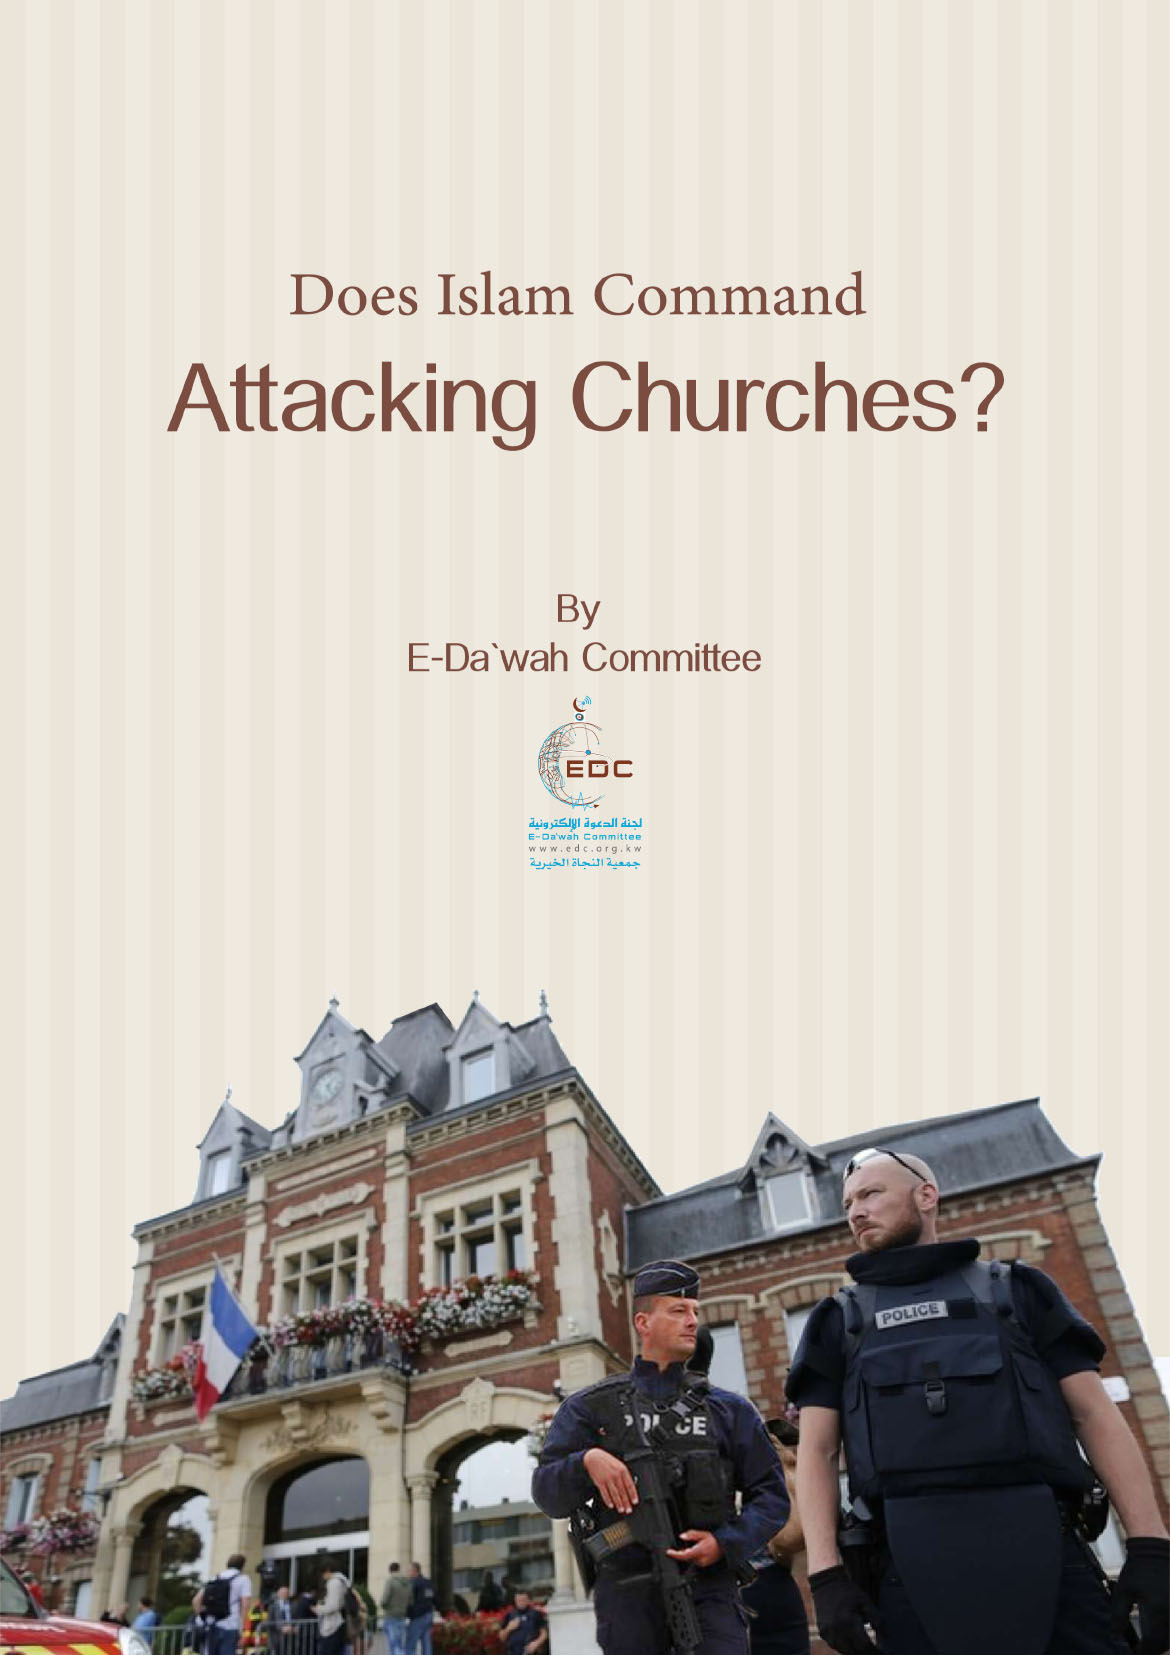 en_Does_Islam_Command_Attacking_Churches-1